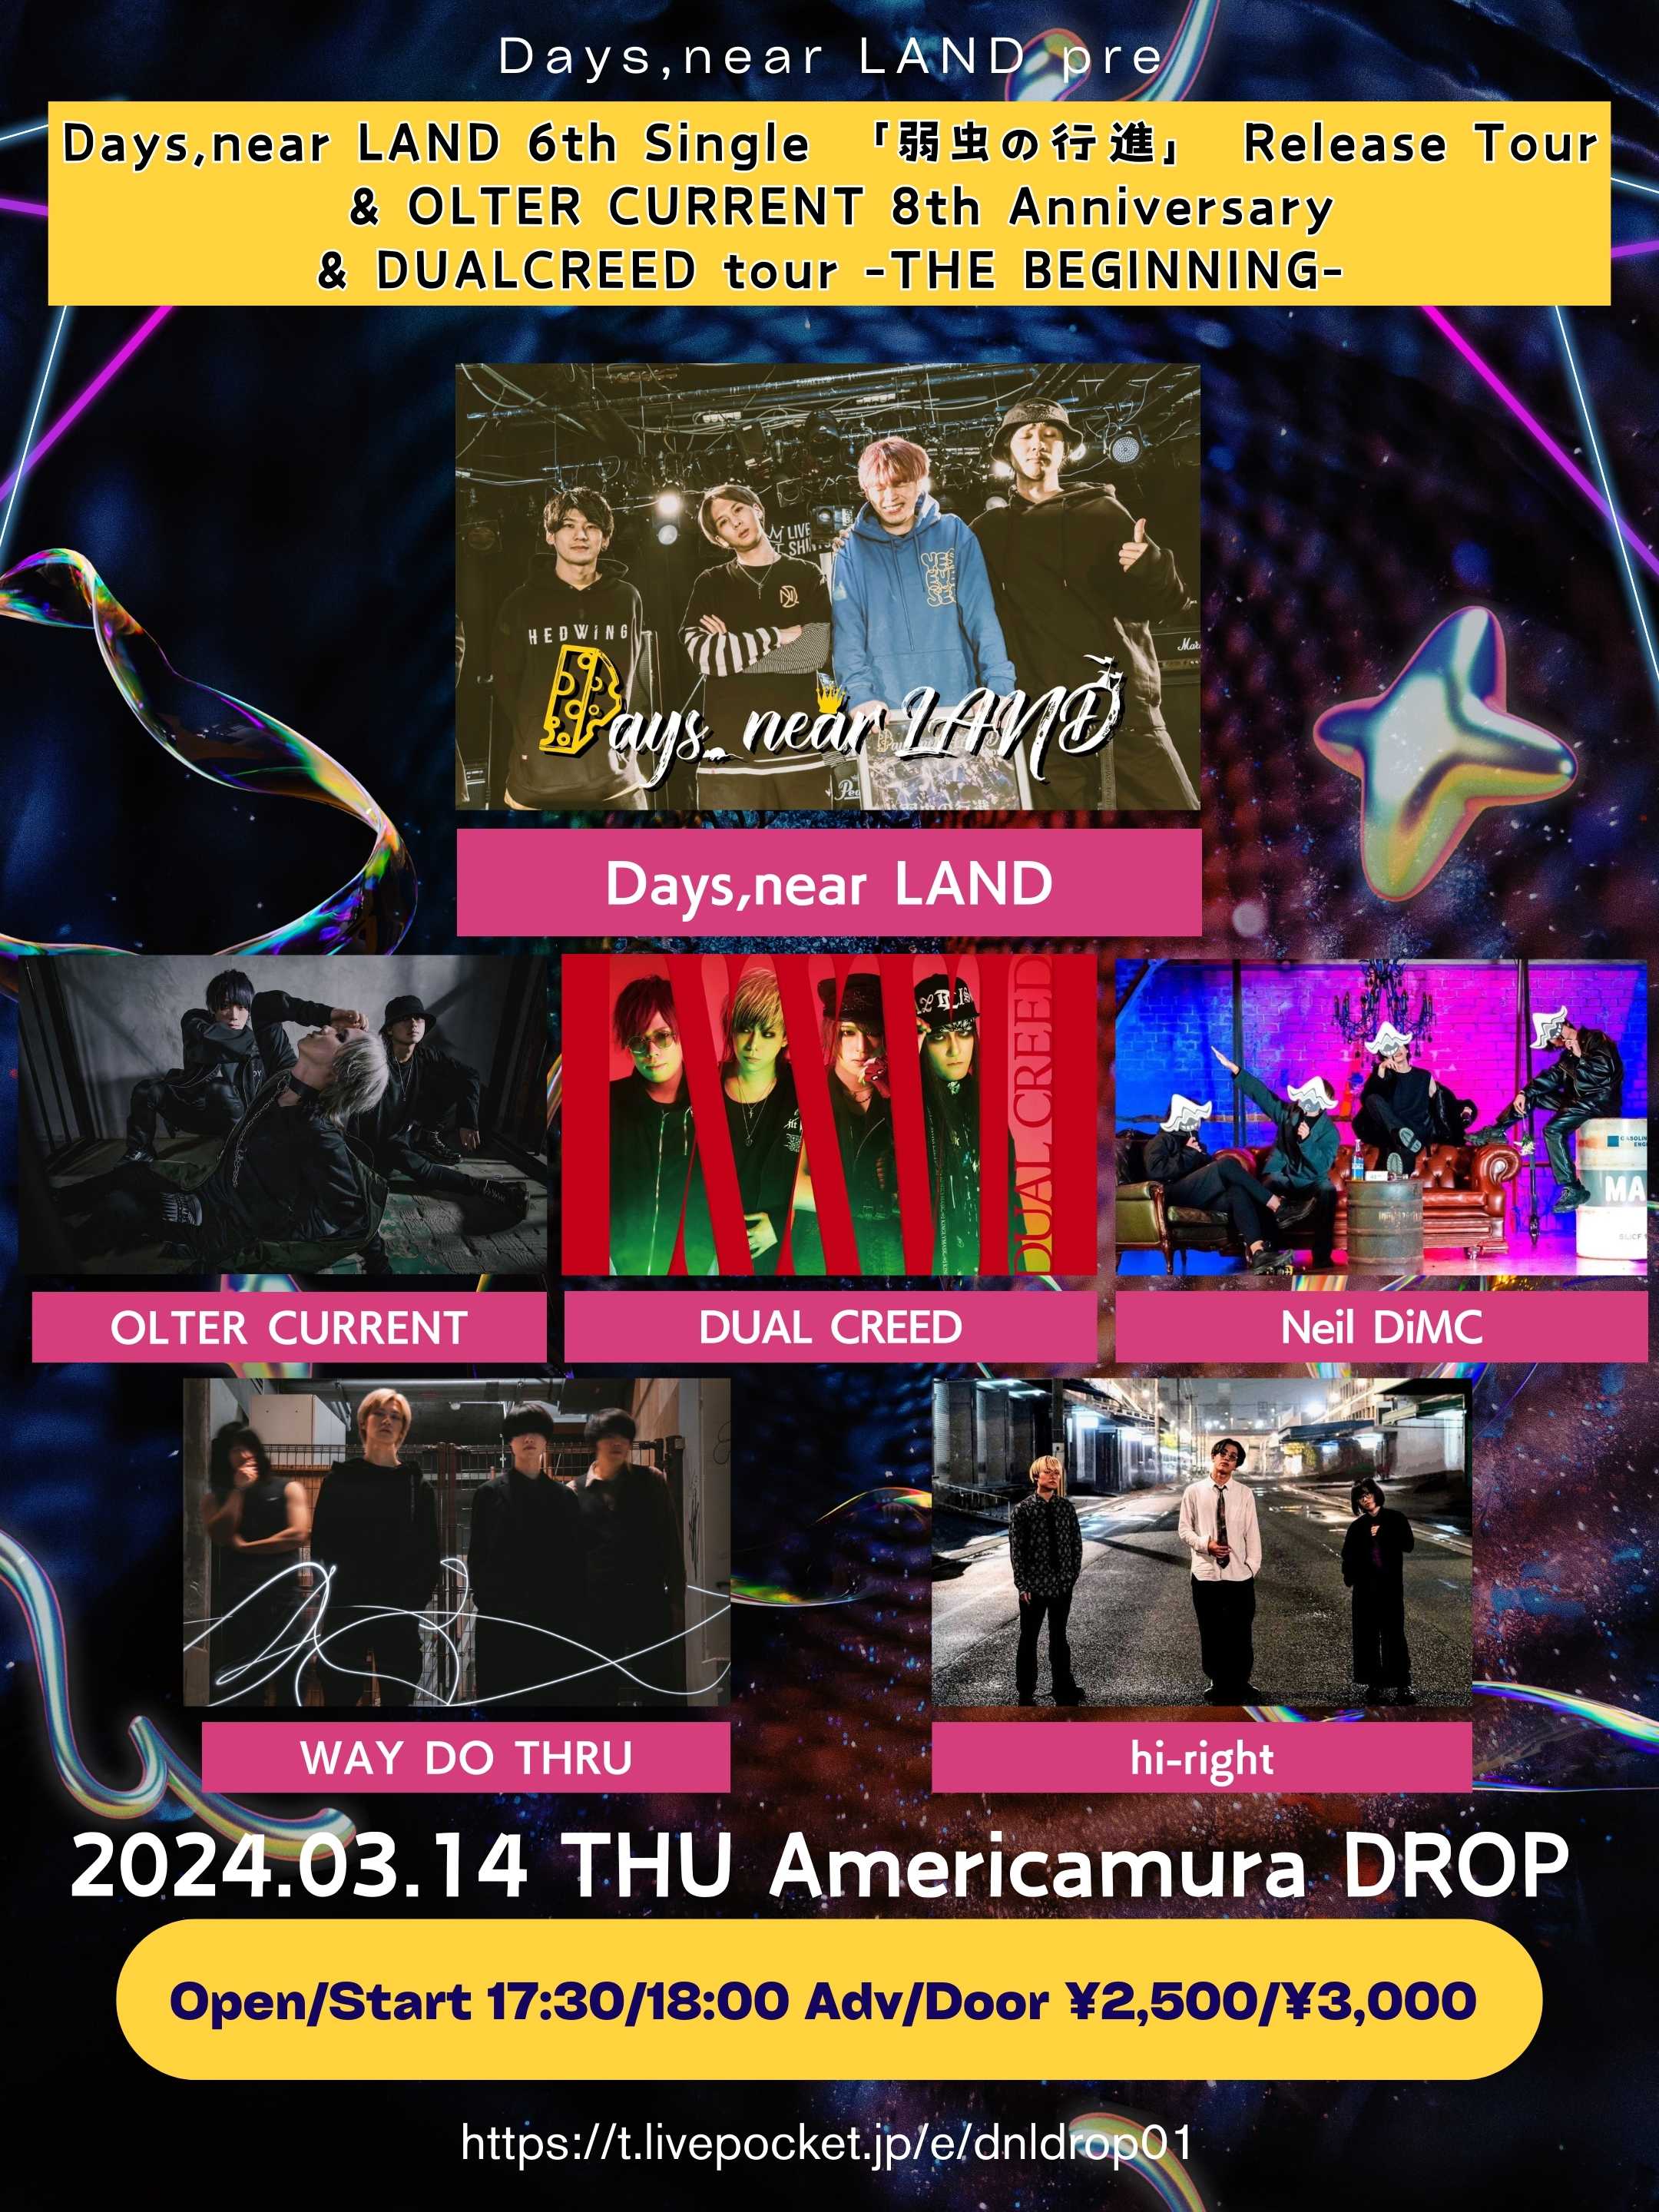 Days,near LAND 6th Single 「弱虫の行進」 Release Tour” & OLTER CURRENT 8th Anniversary & DUALCREED tour -THE BEGINNING-